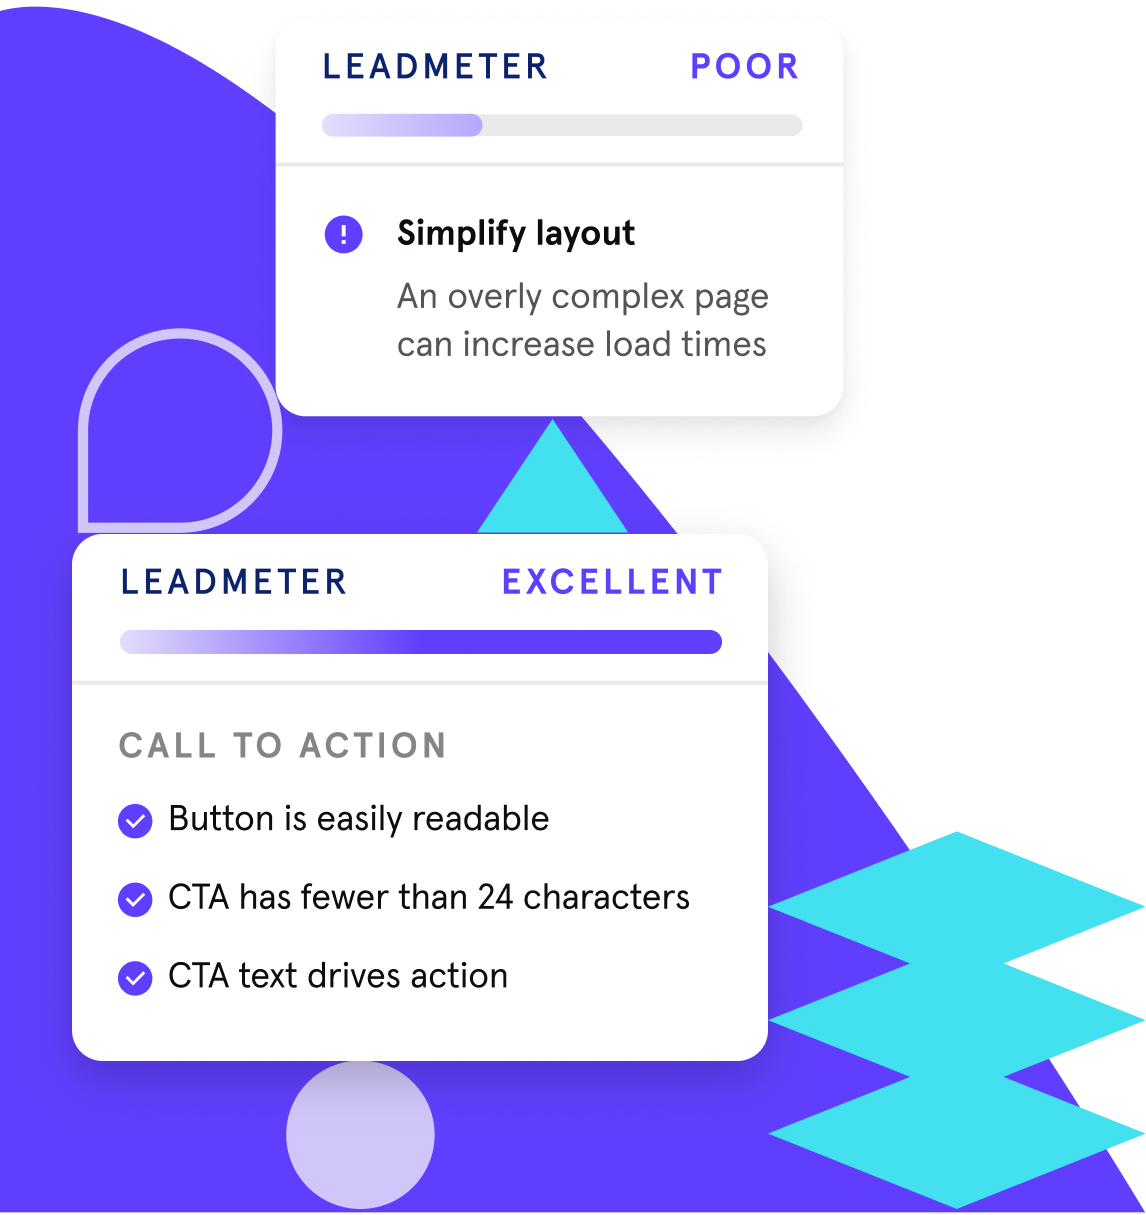 Get real-time landing page guidance with Leadpages' Leadmeter